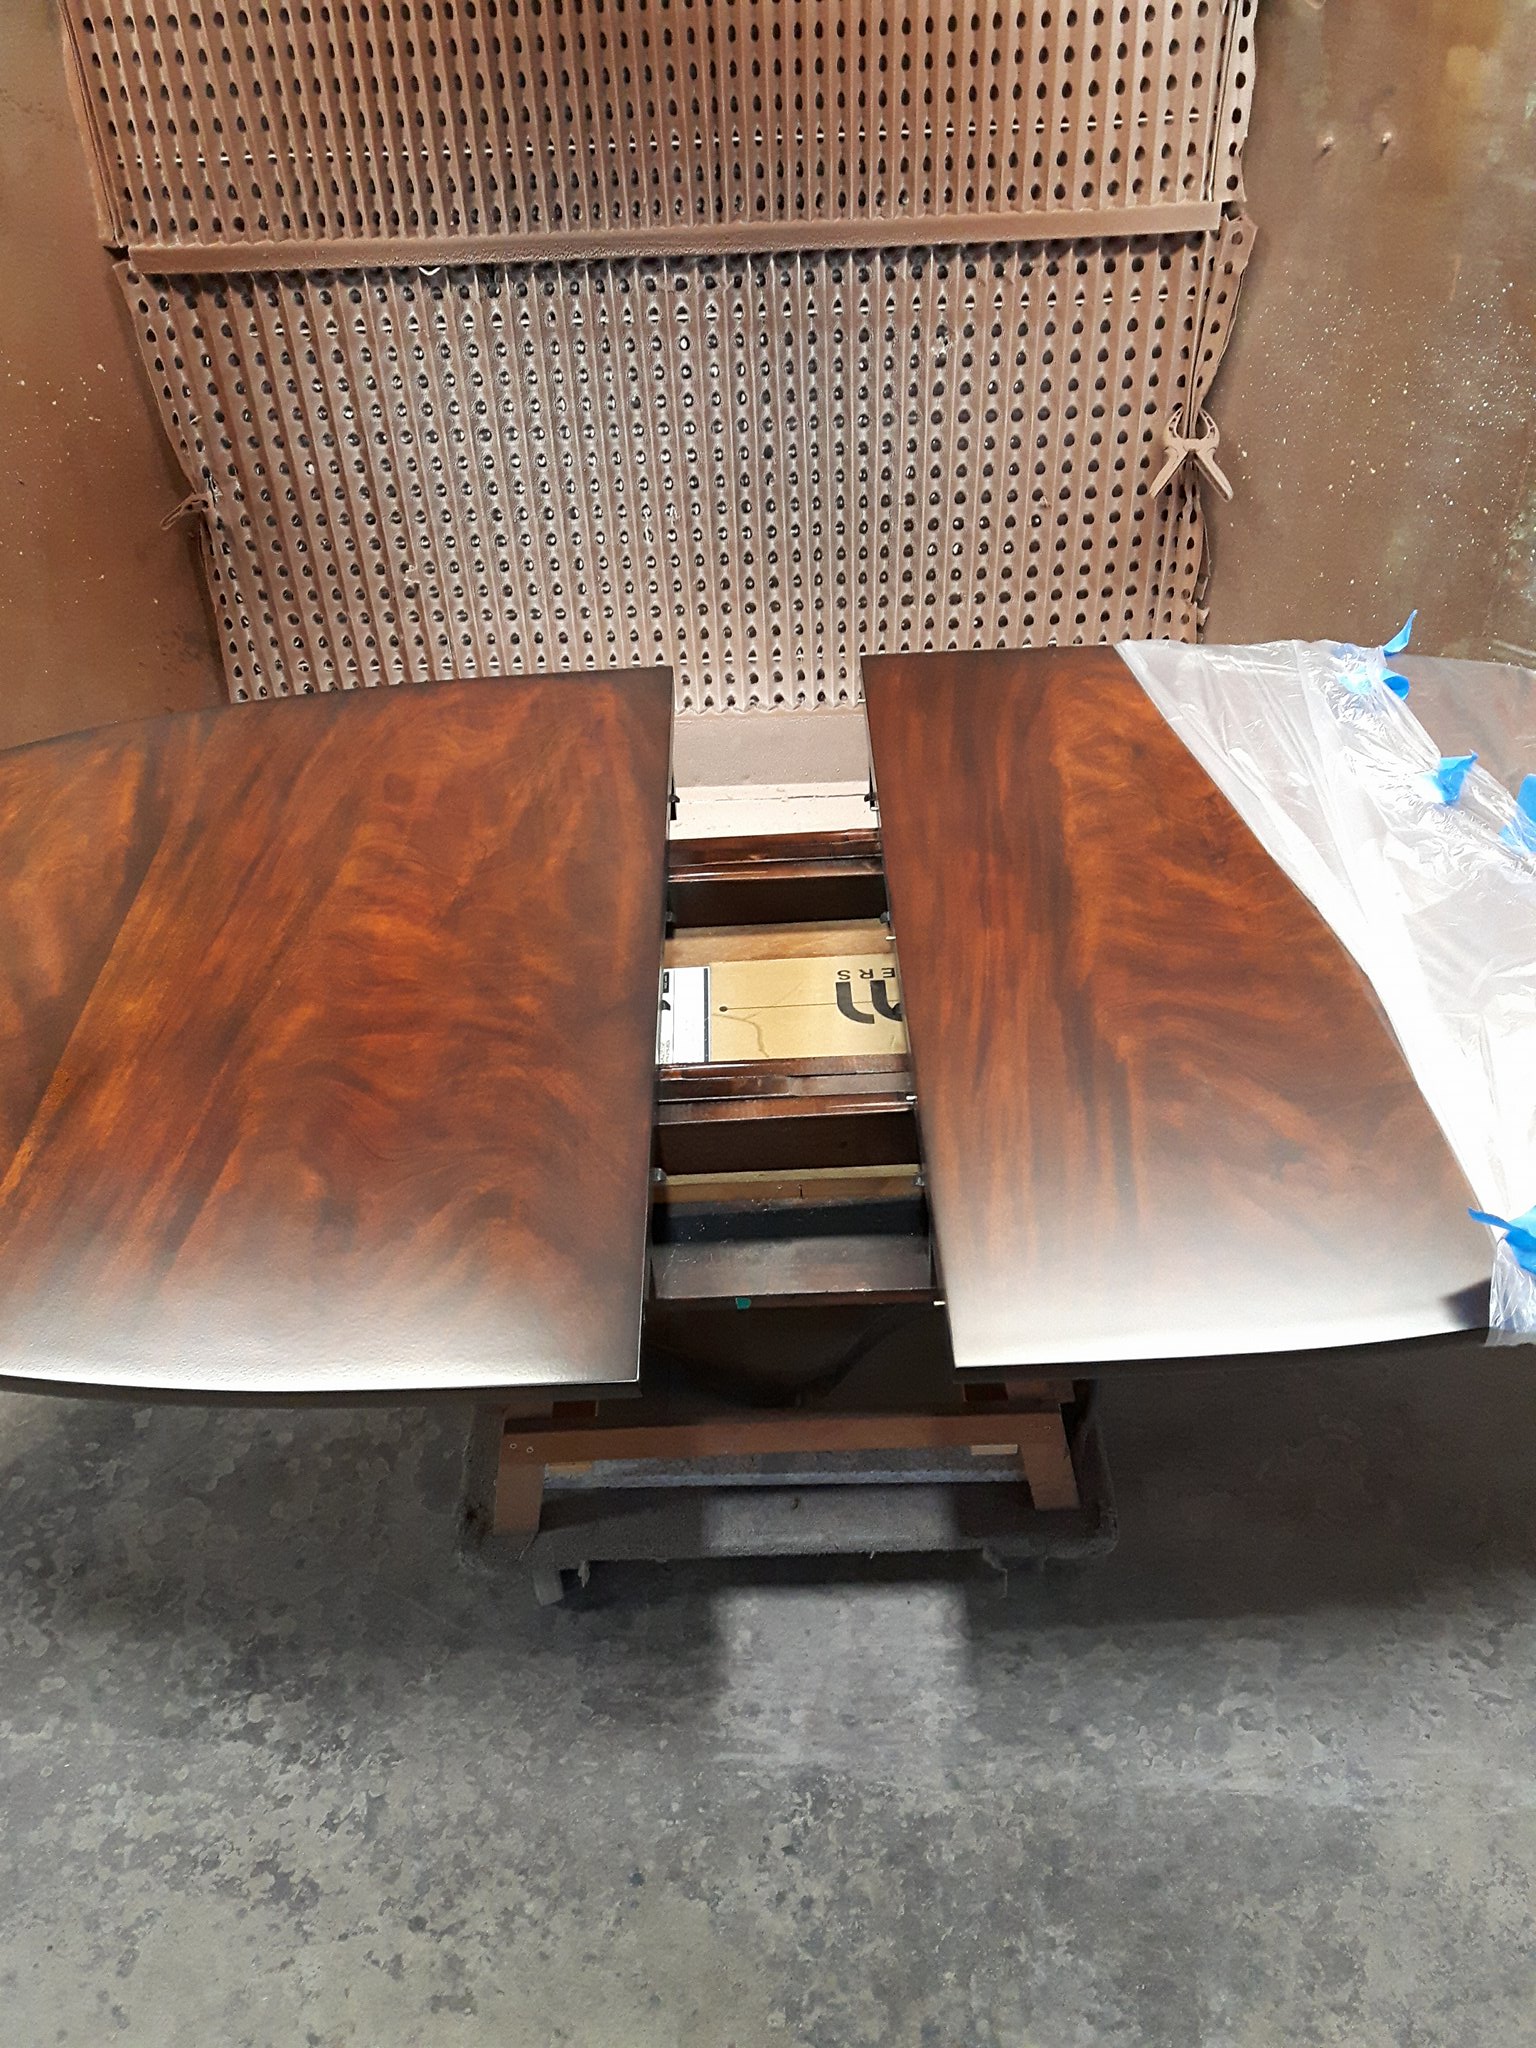 TUP DINING TABLE SEDORE LEFT SIDE REFINISHED TO MATCH RIGHT SIDE.jpg